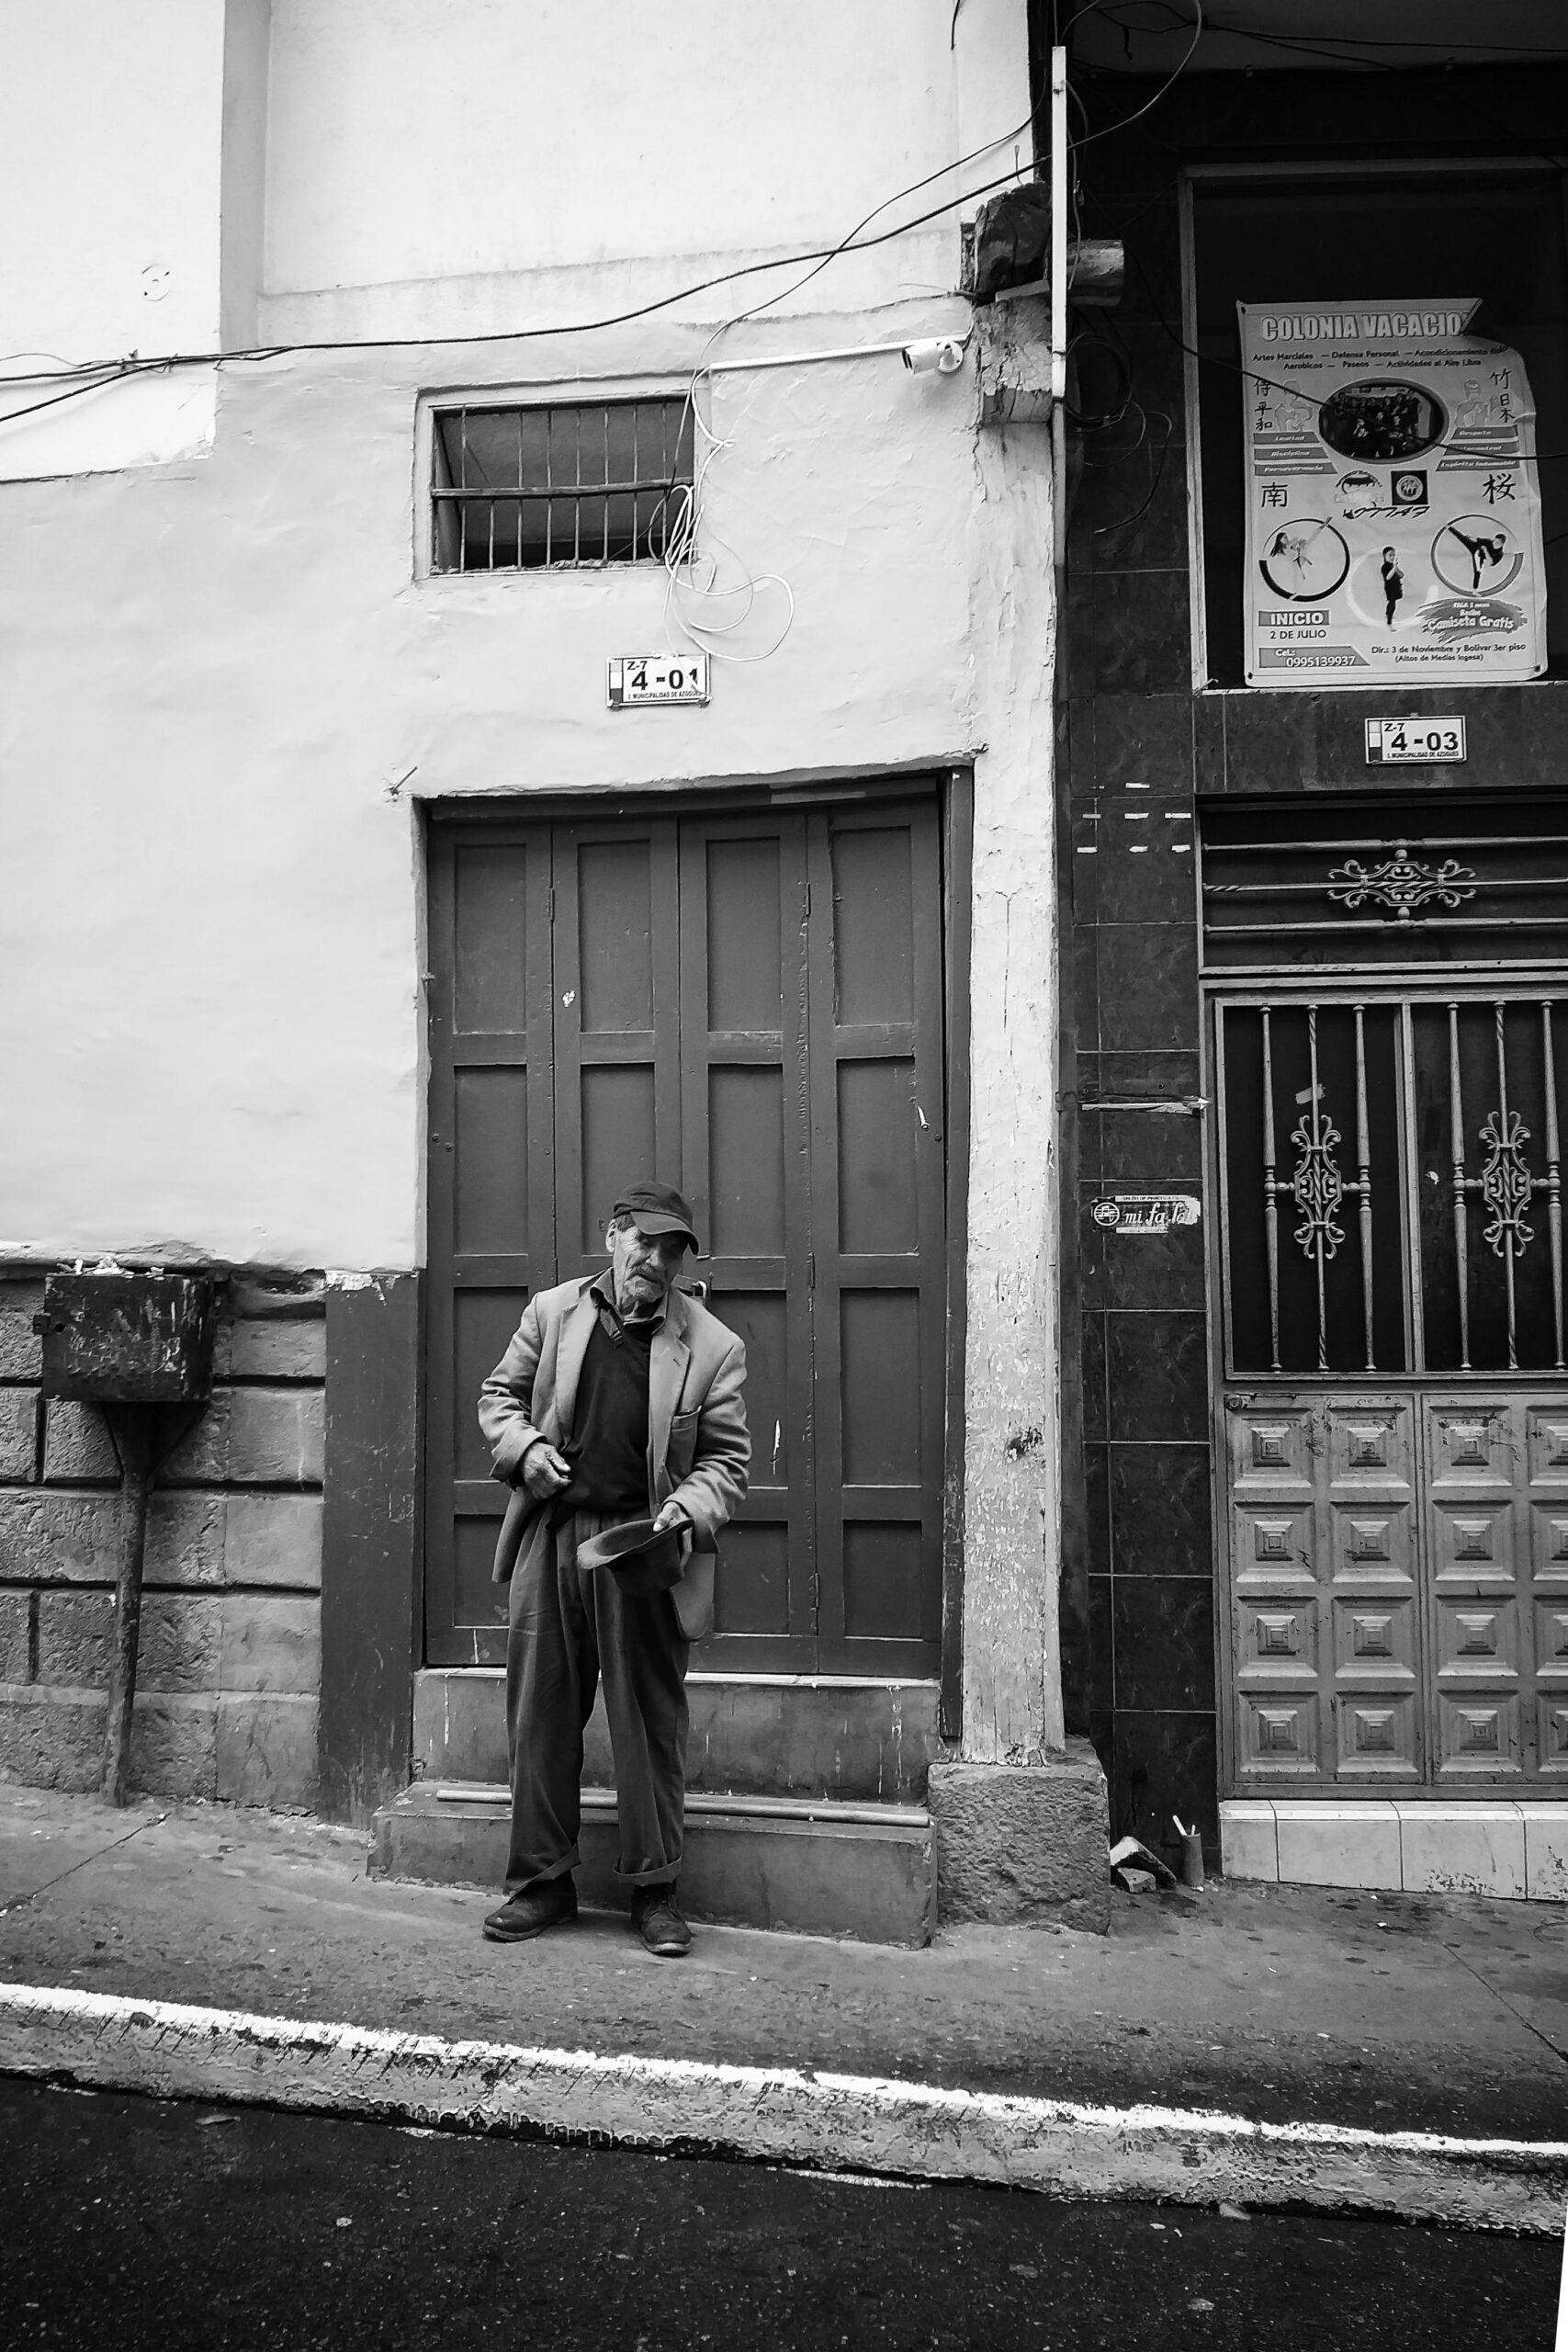 Monochrome image of a man standing by a door on a city street